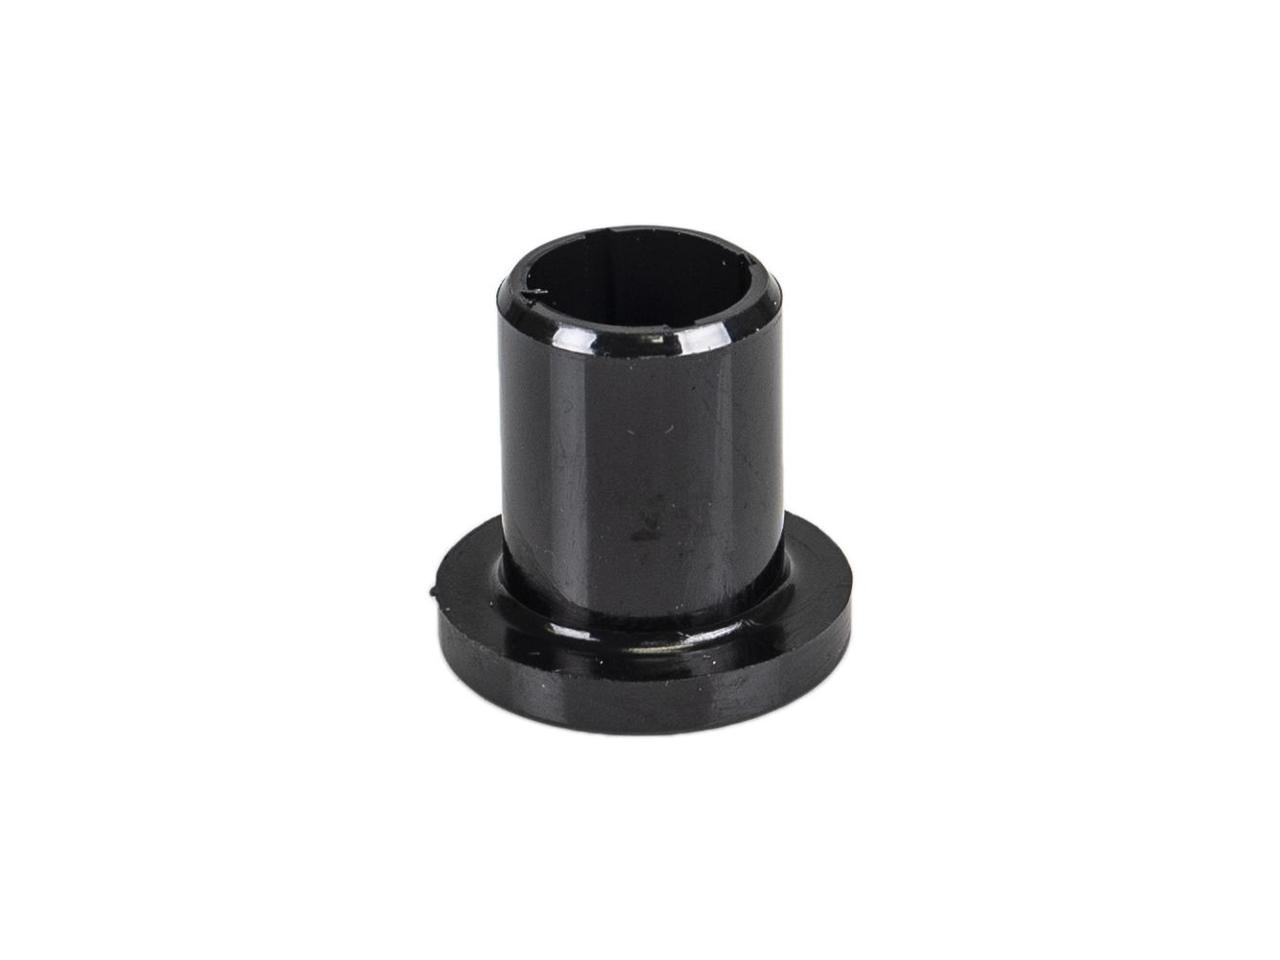 NICHE Complete Front and Rear Control A-arm Bushings Kit for 2015-2016 Polaris RZR and S 900 5450095 5439874 5436832 